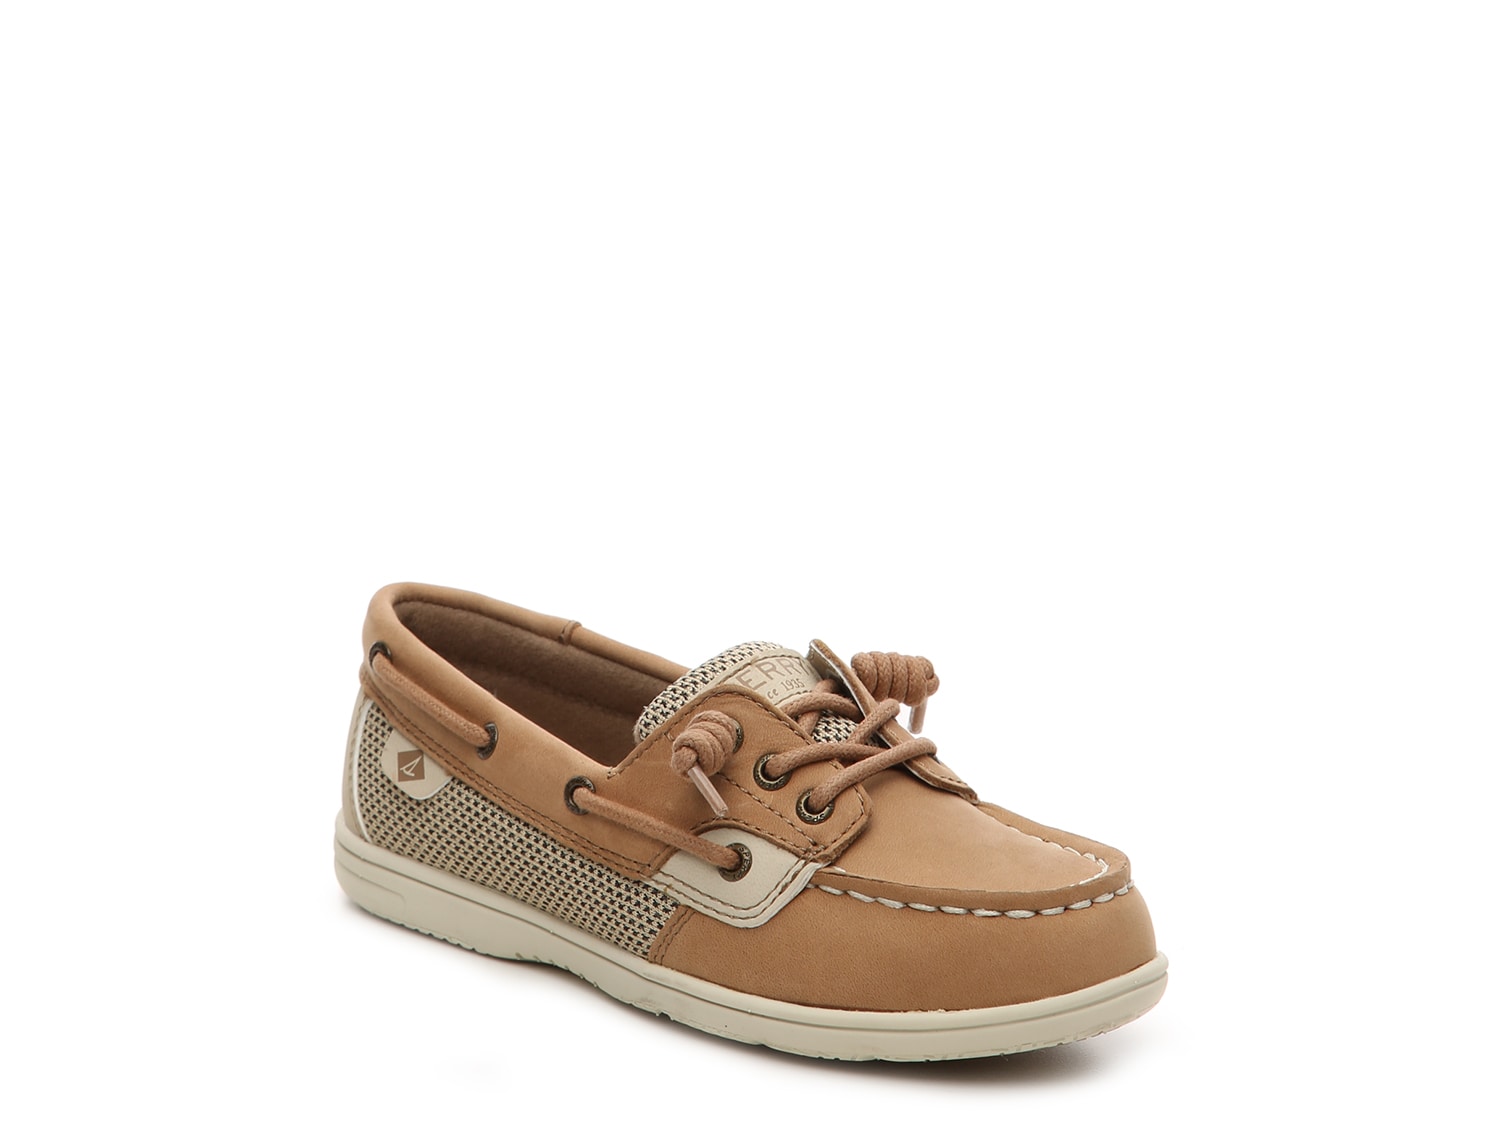 sperry youth shoes